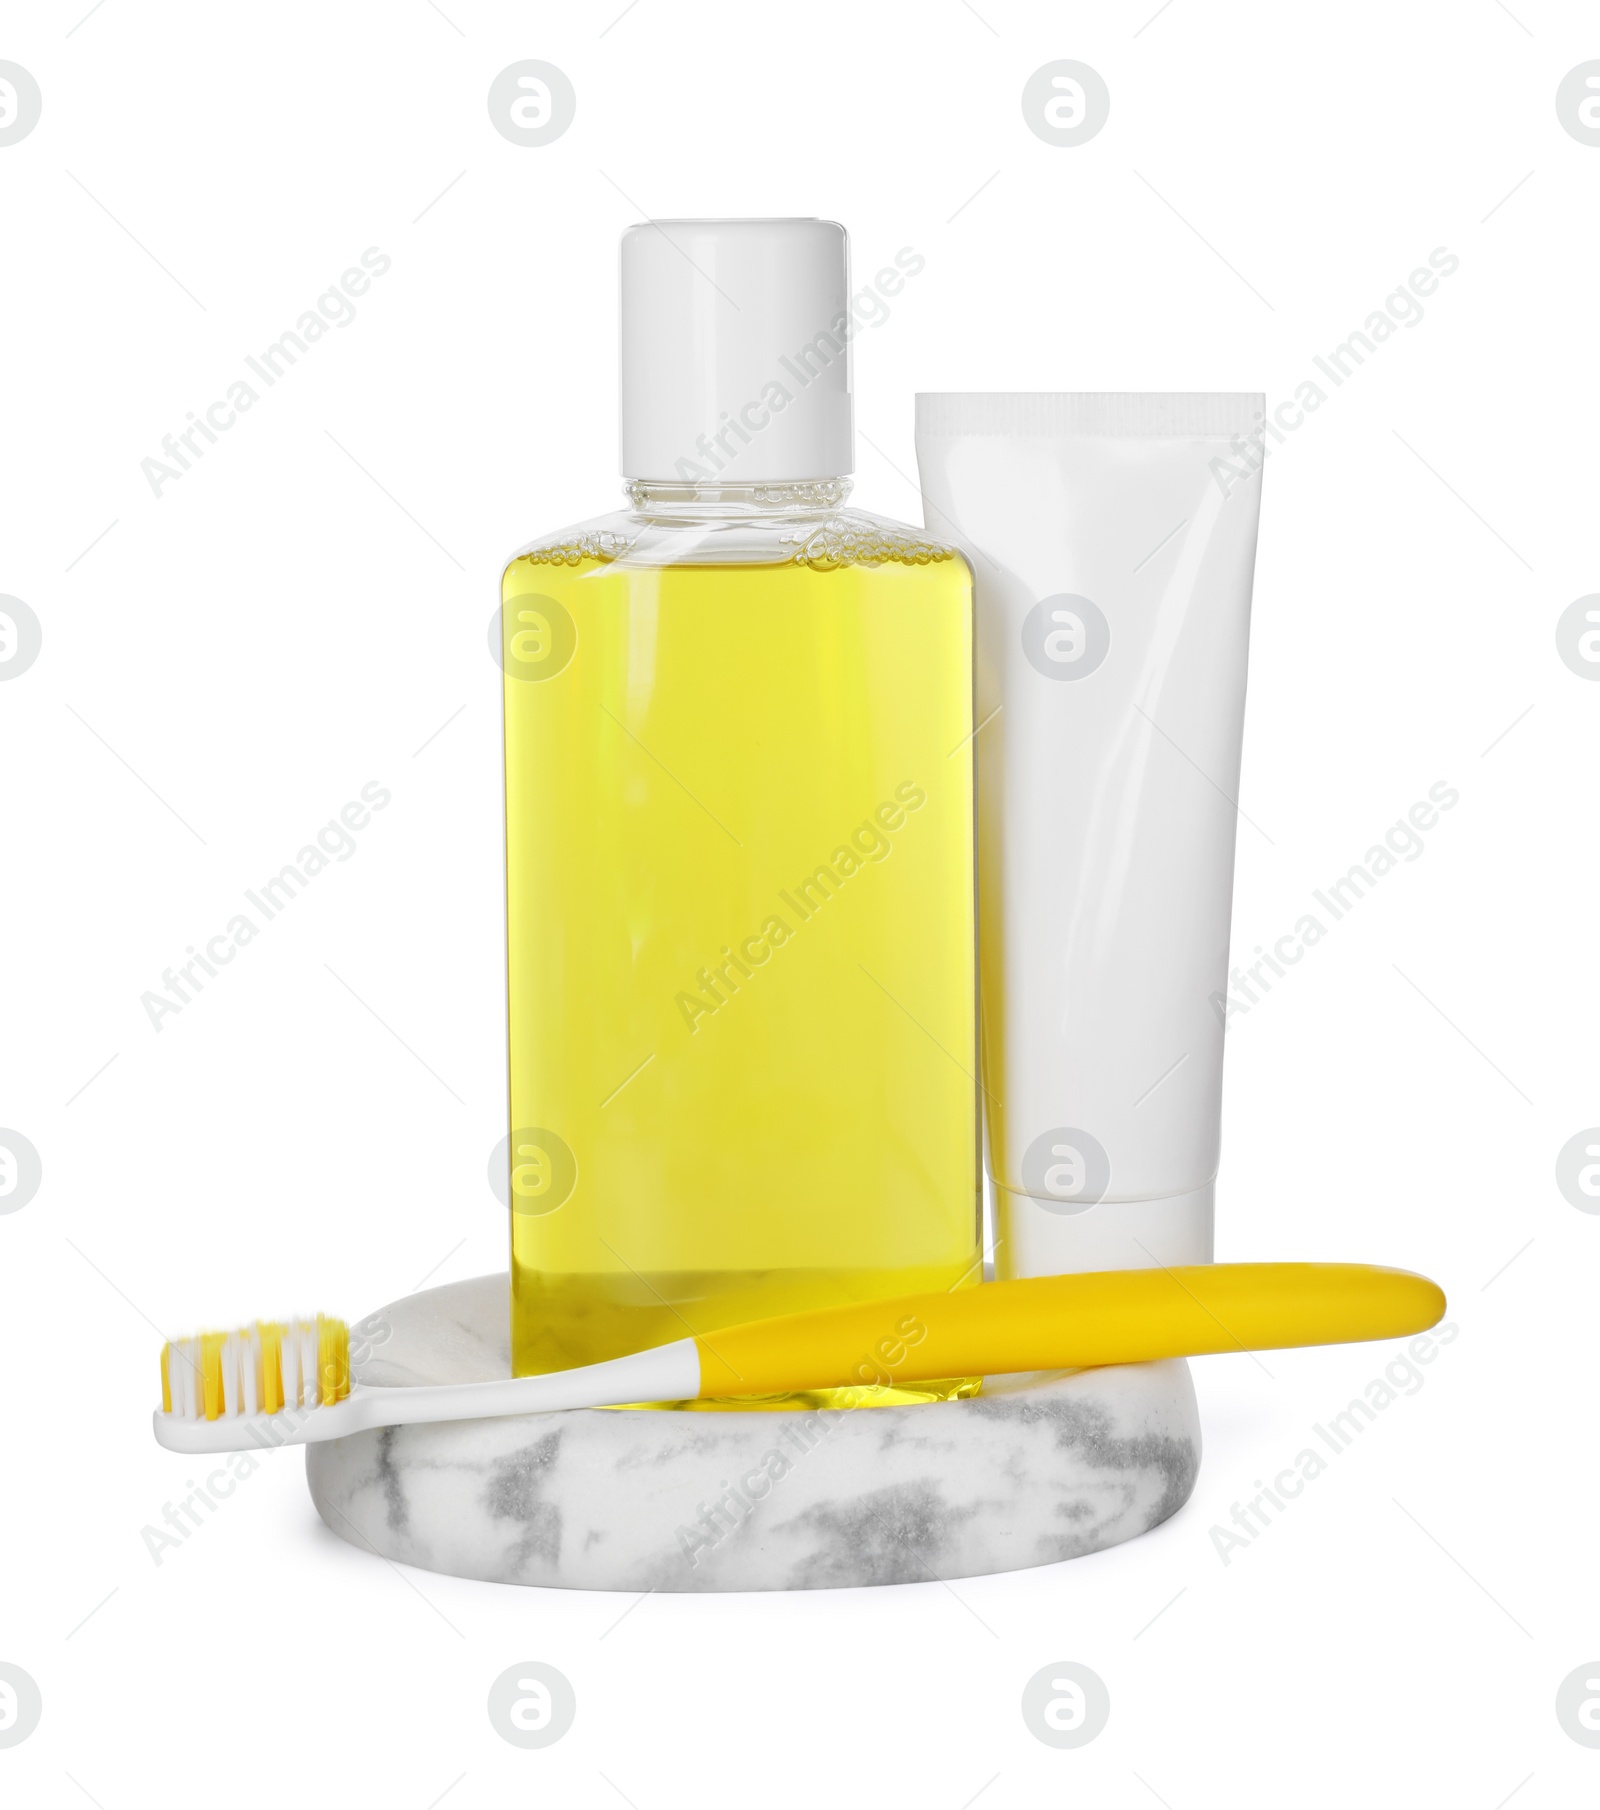 Photo of Mouthwash, toothbrush and toothpaste isolated on white